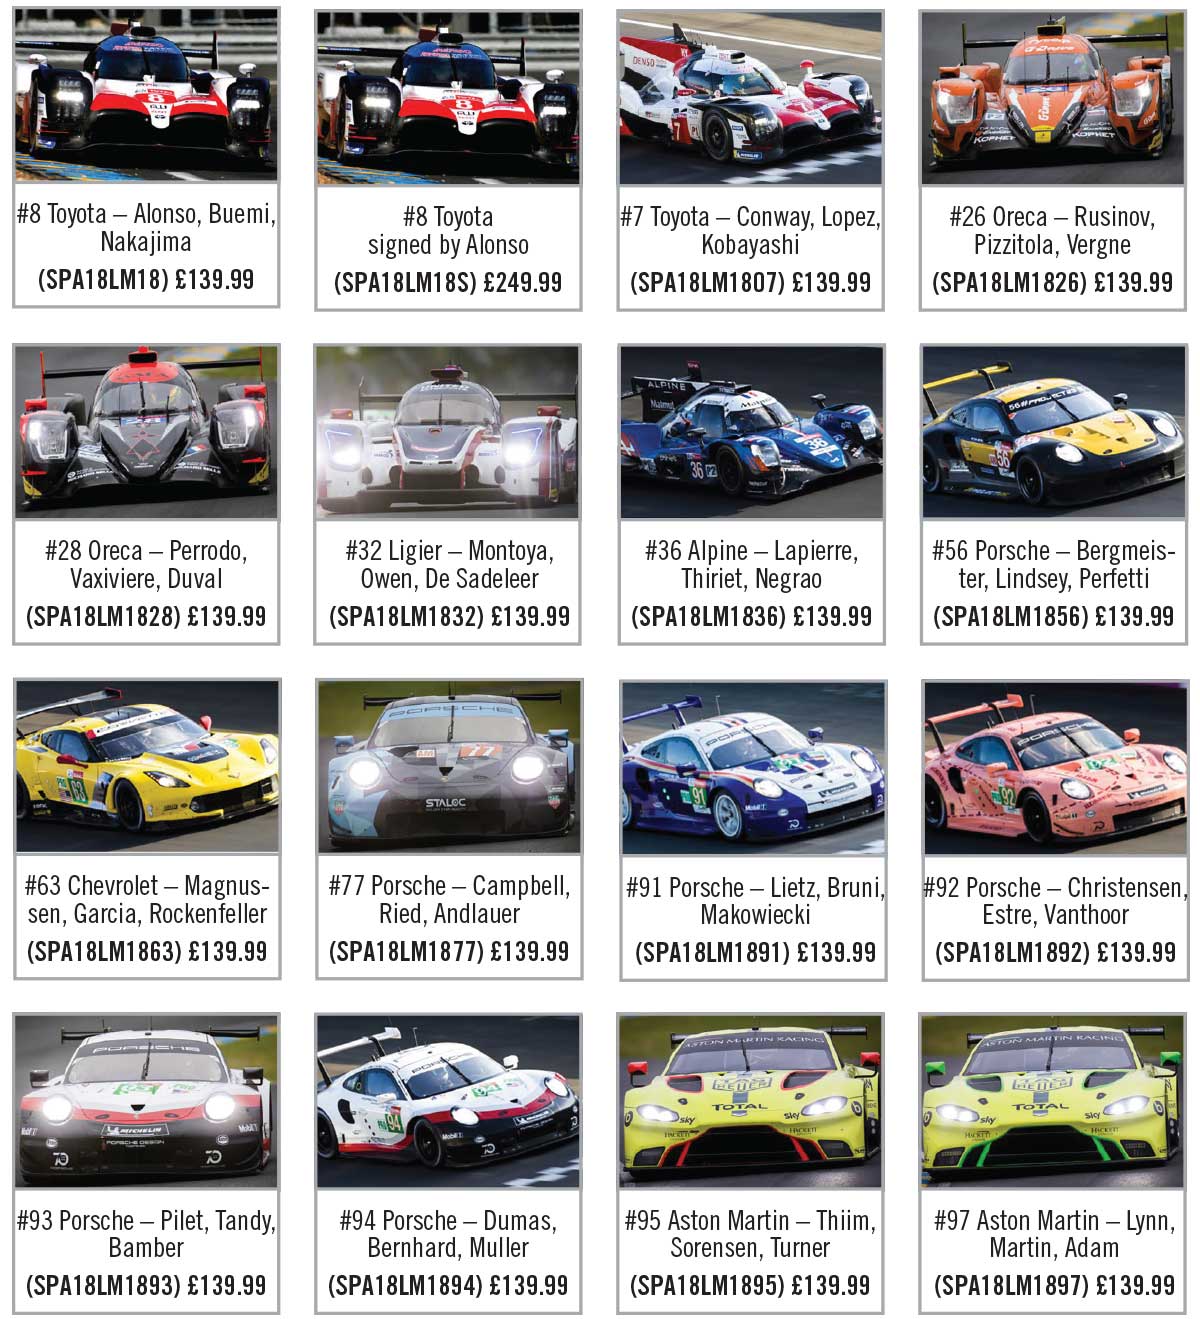 1:18 2018 Le Mans models from Spark